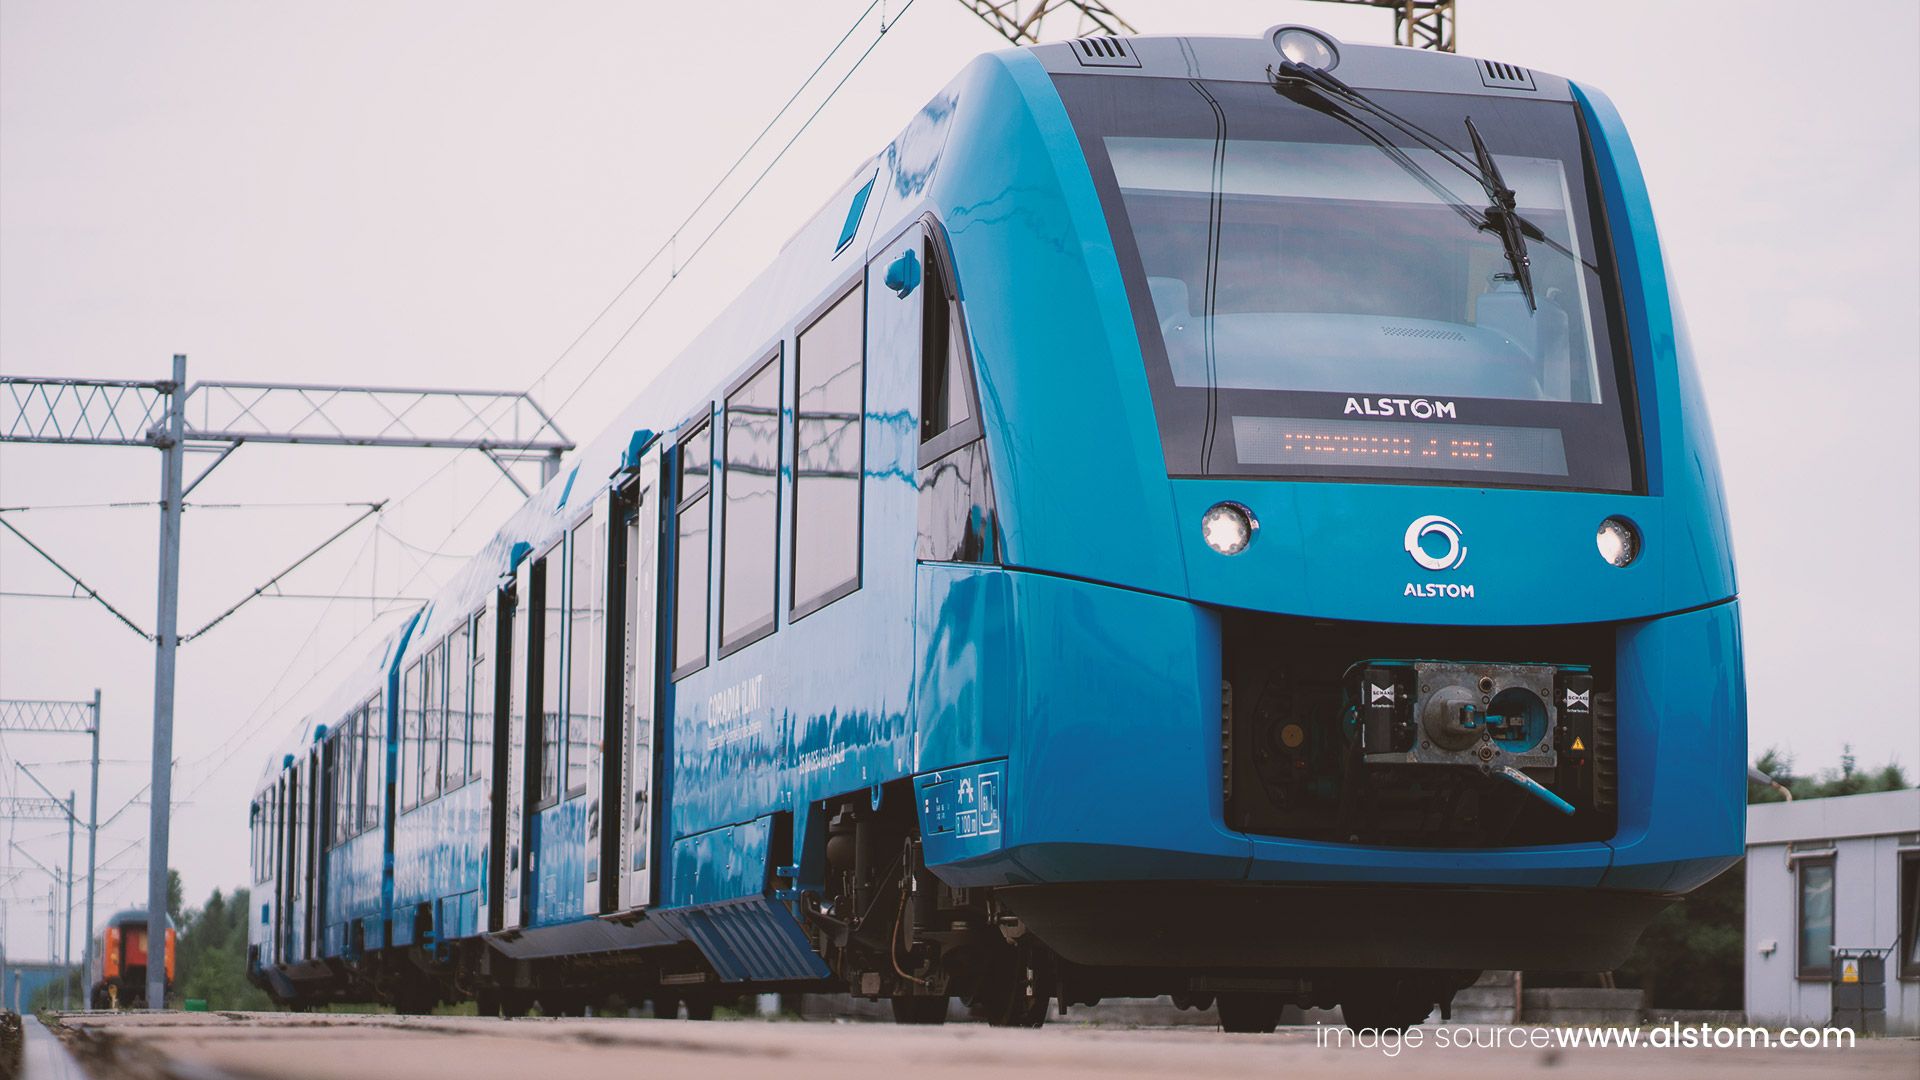 Germany Launches World’s First Hydrogen Powered Passenger Train Service.